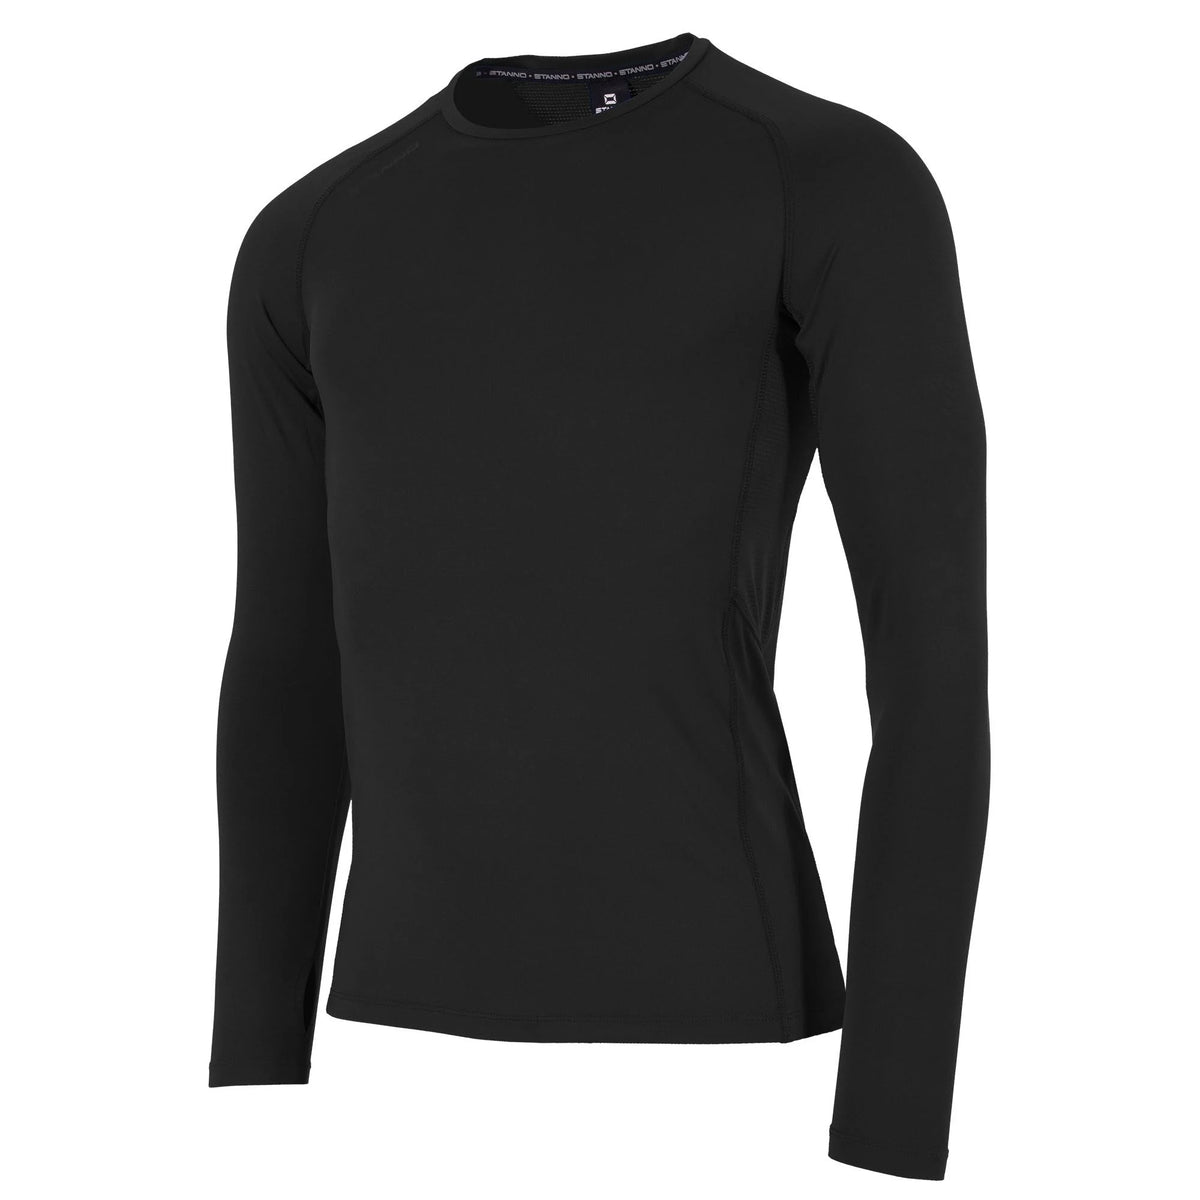 Core Long Sleeve Baselayer Shirt in Adult